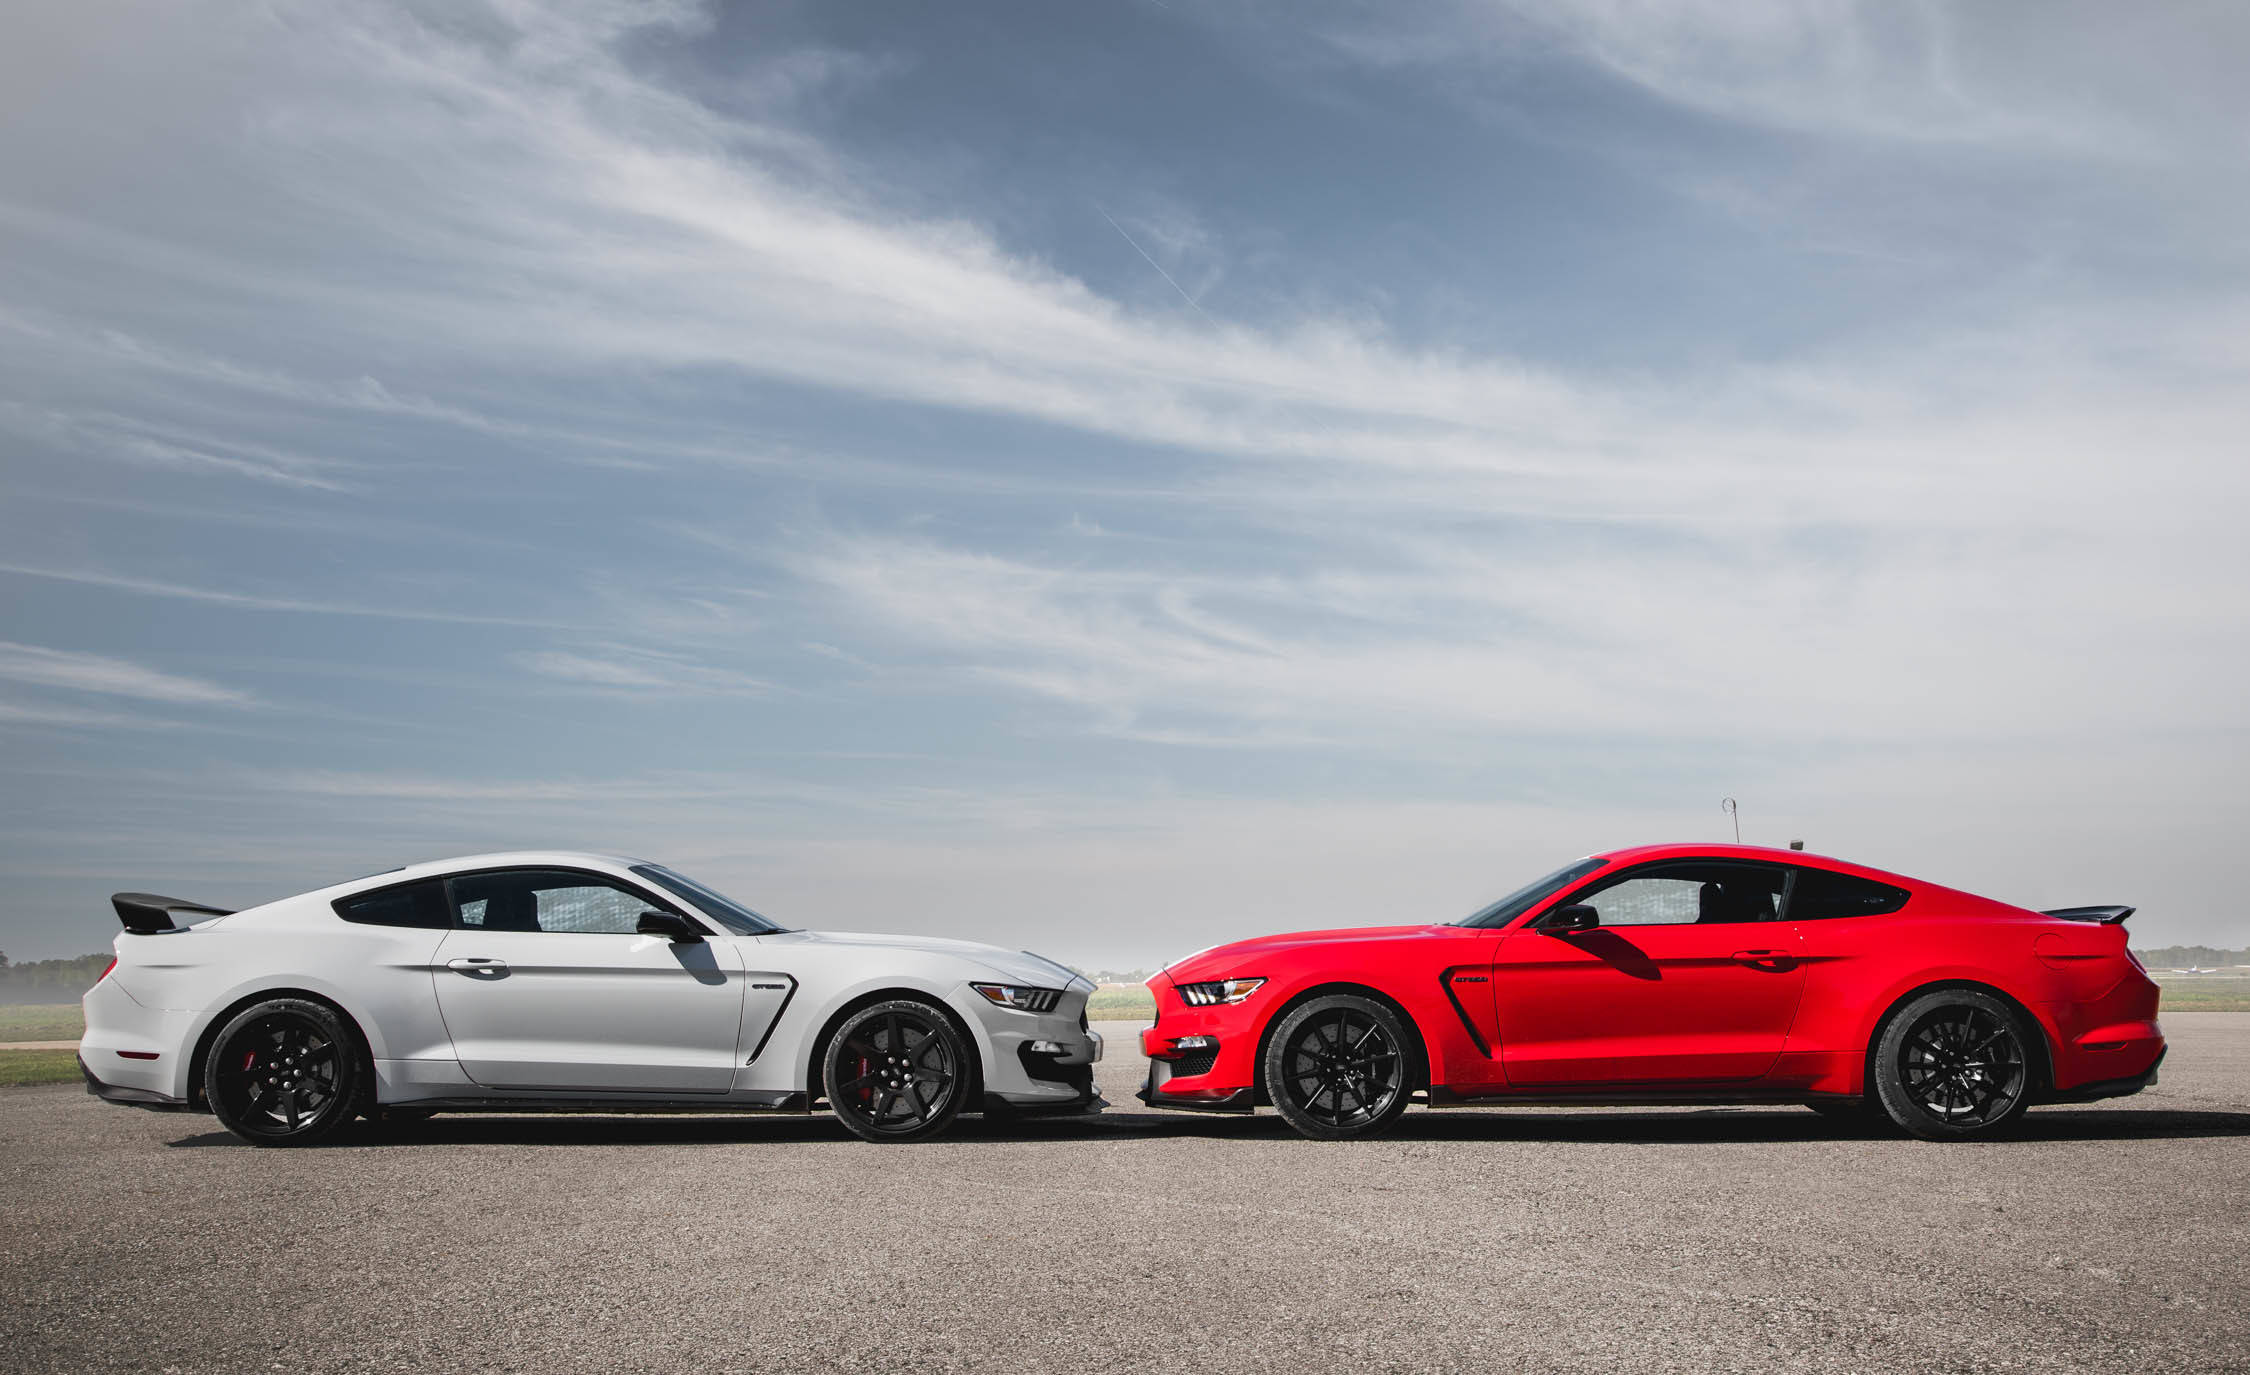 2250x1375 ...  2016 Ford Mustang Shelby GT350 and 2016 Ford Mustang Shelby  GT350R .